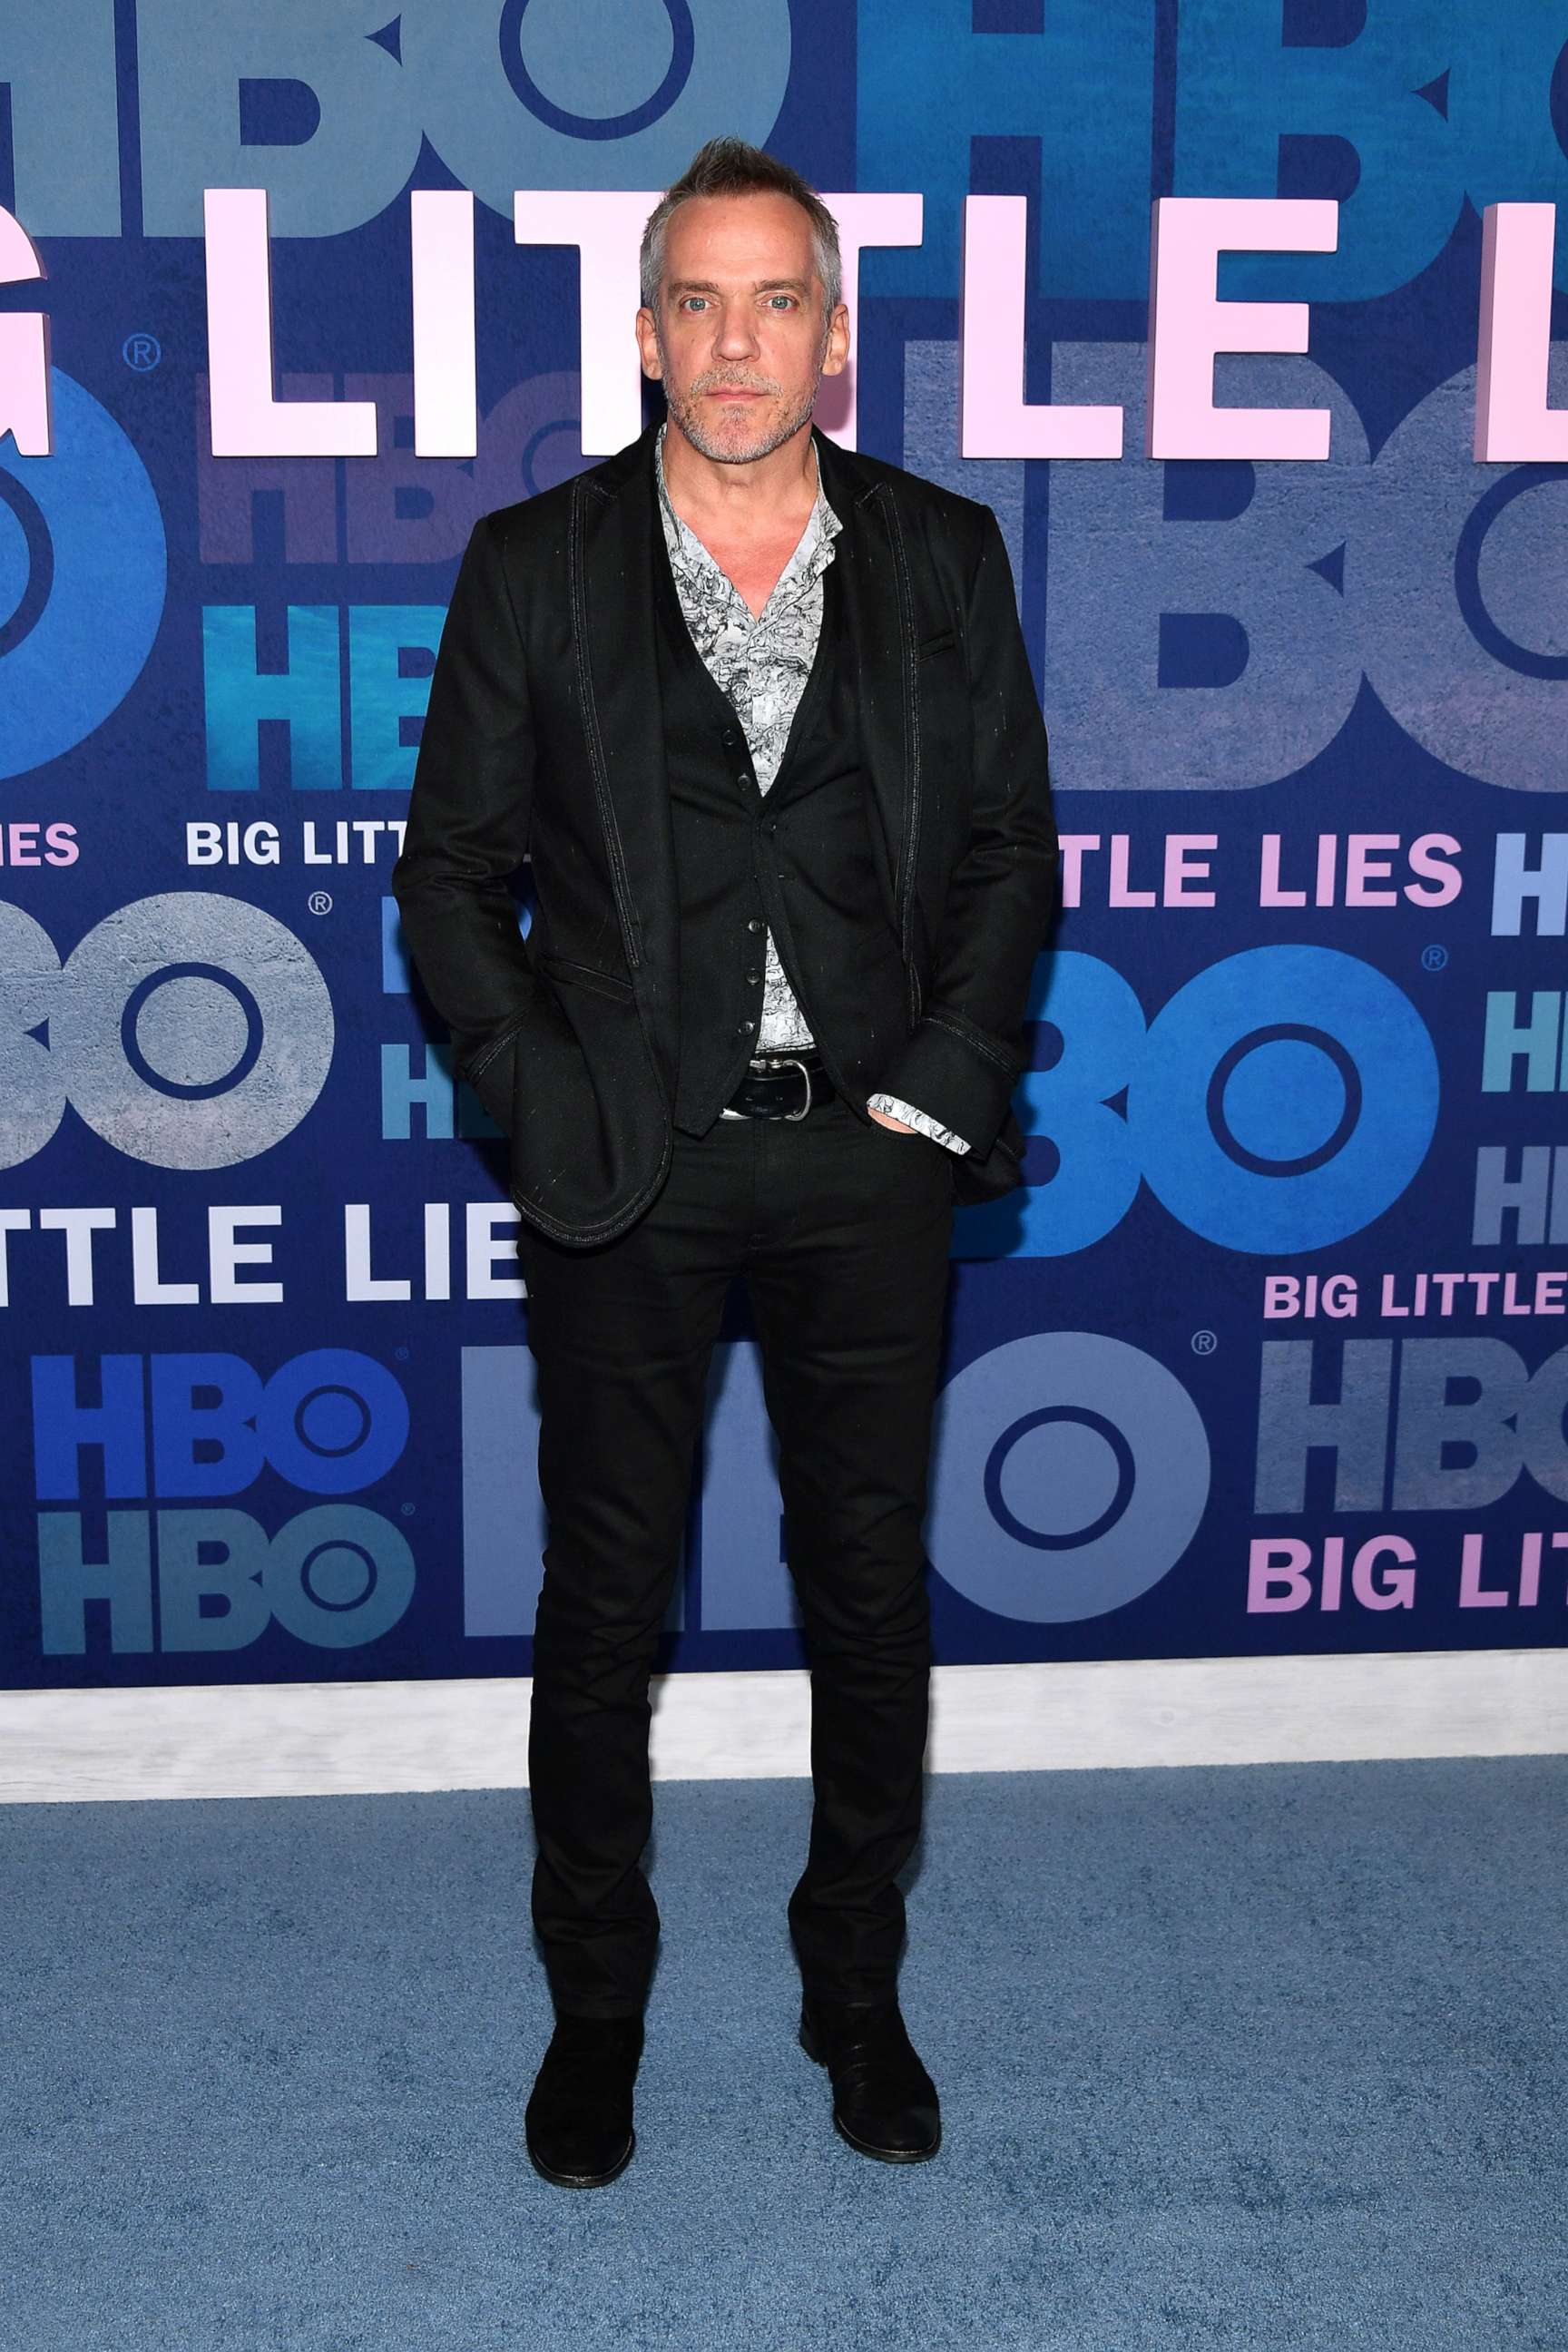 PHOTO: Director Jean-Marc Vallee attends the "Big Little Lies" Season 2 Premiere, May 29, 2019, in New York City.